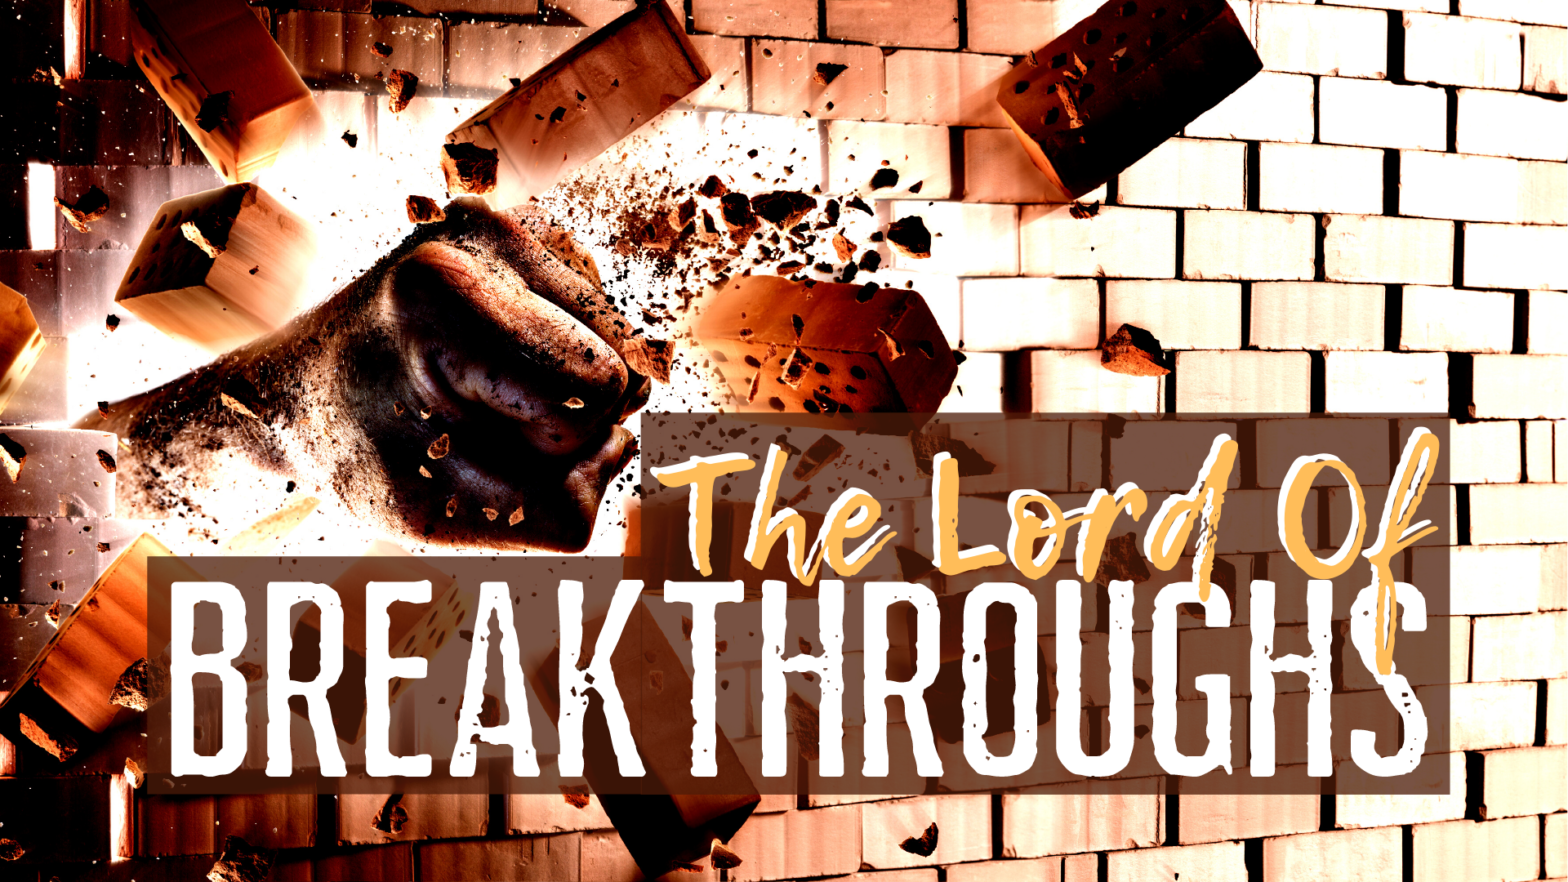 The Lord of Breakthroughs